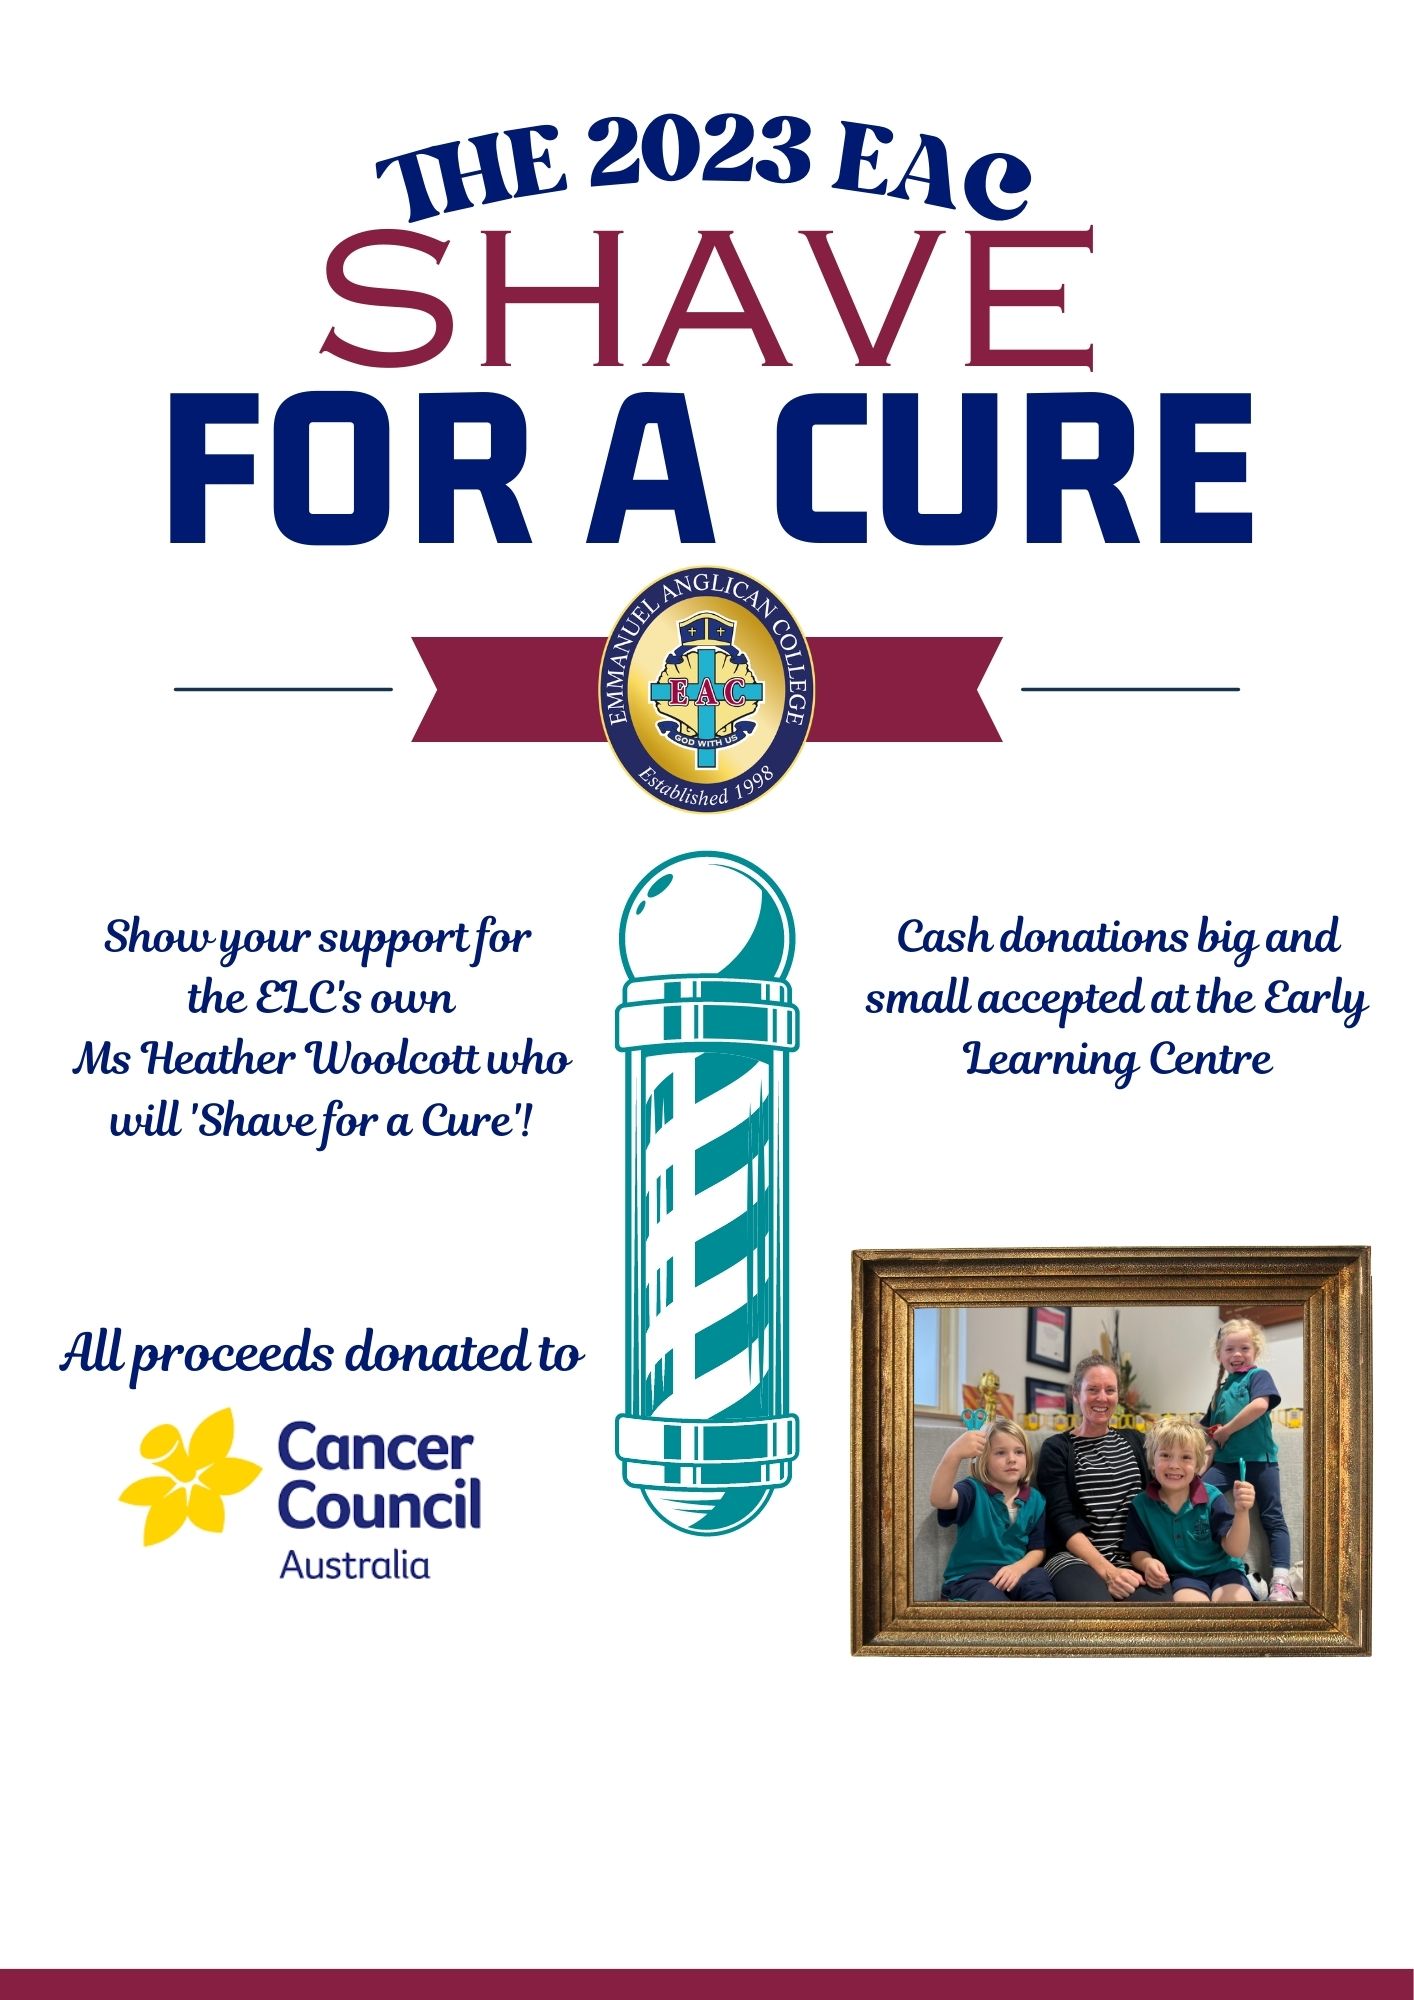 Shave for a Cure